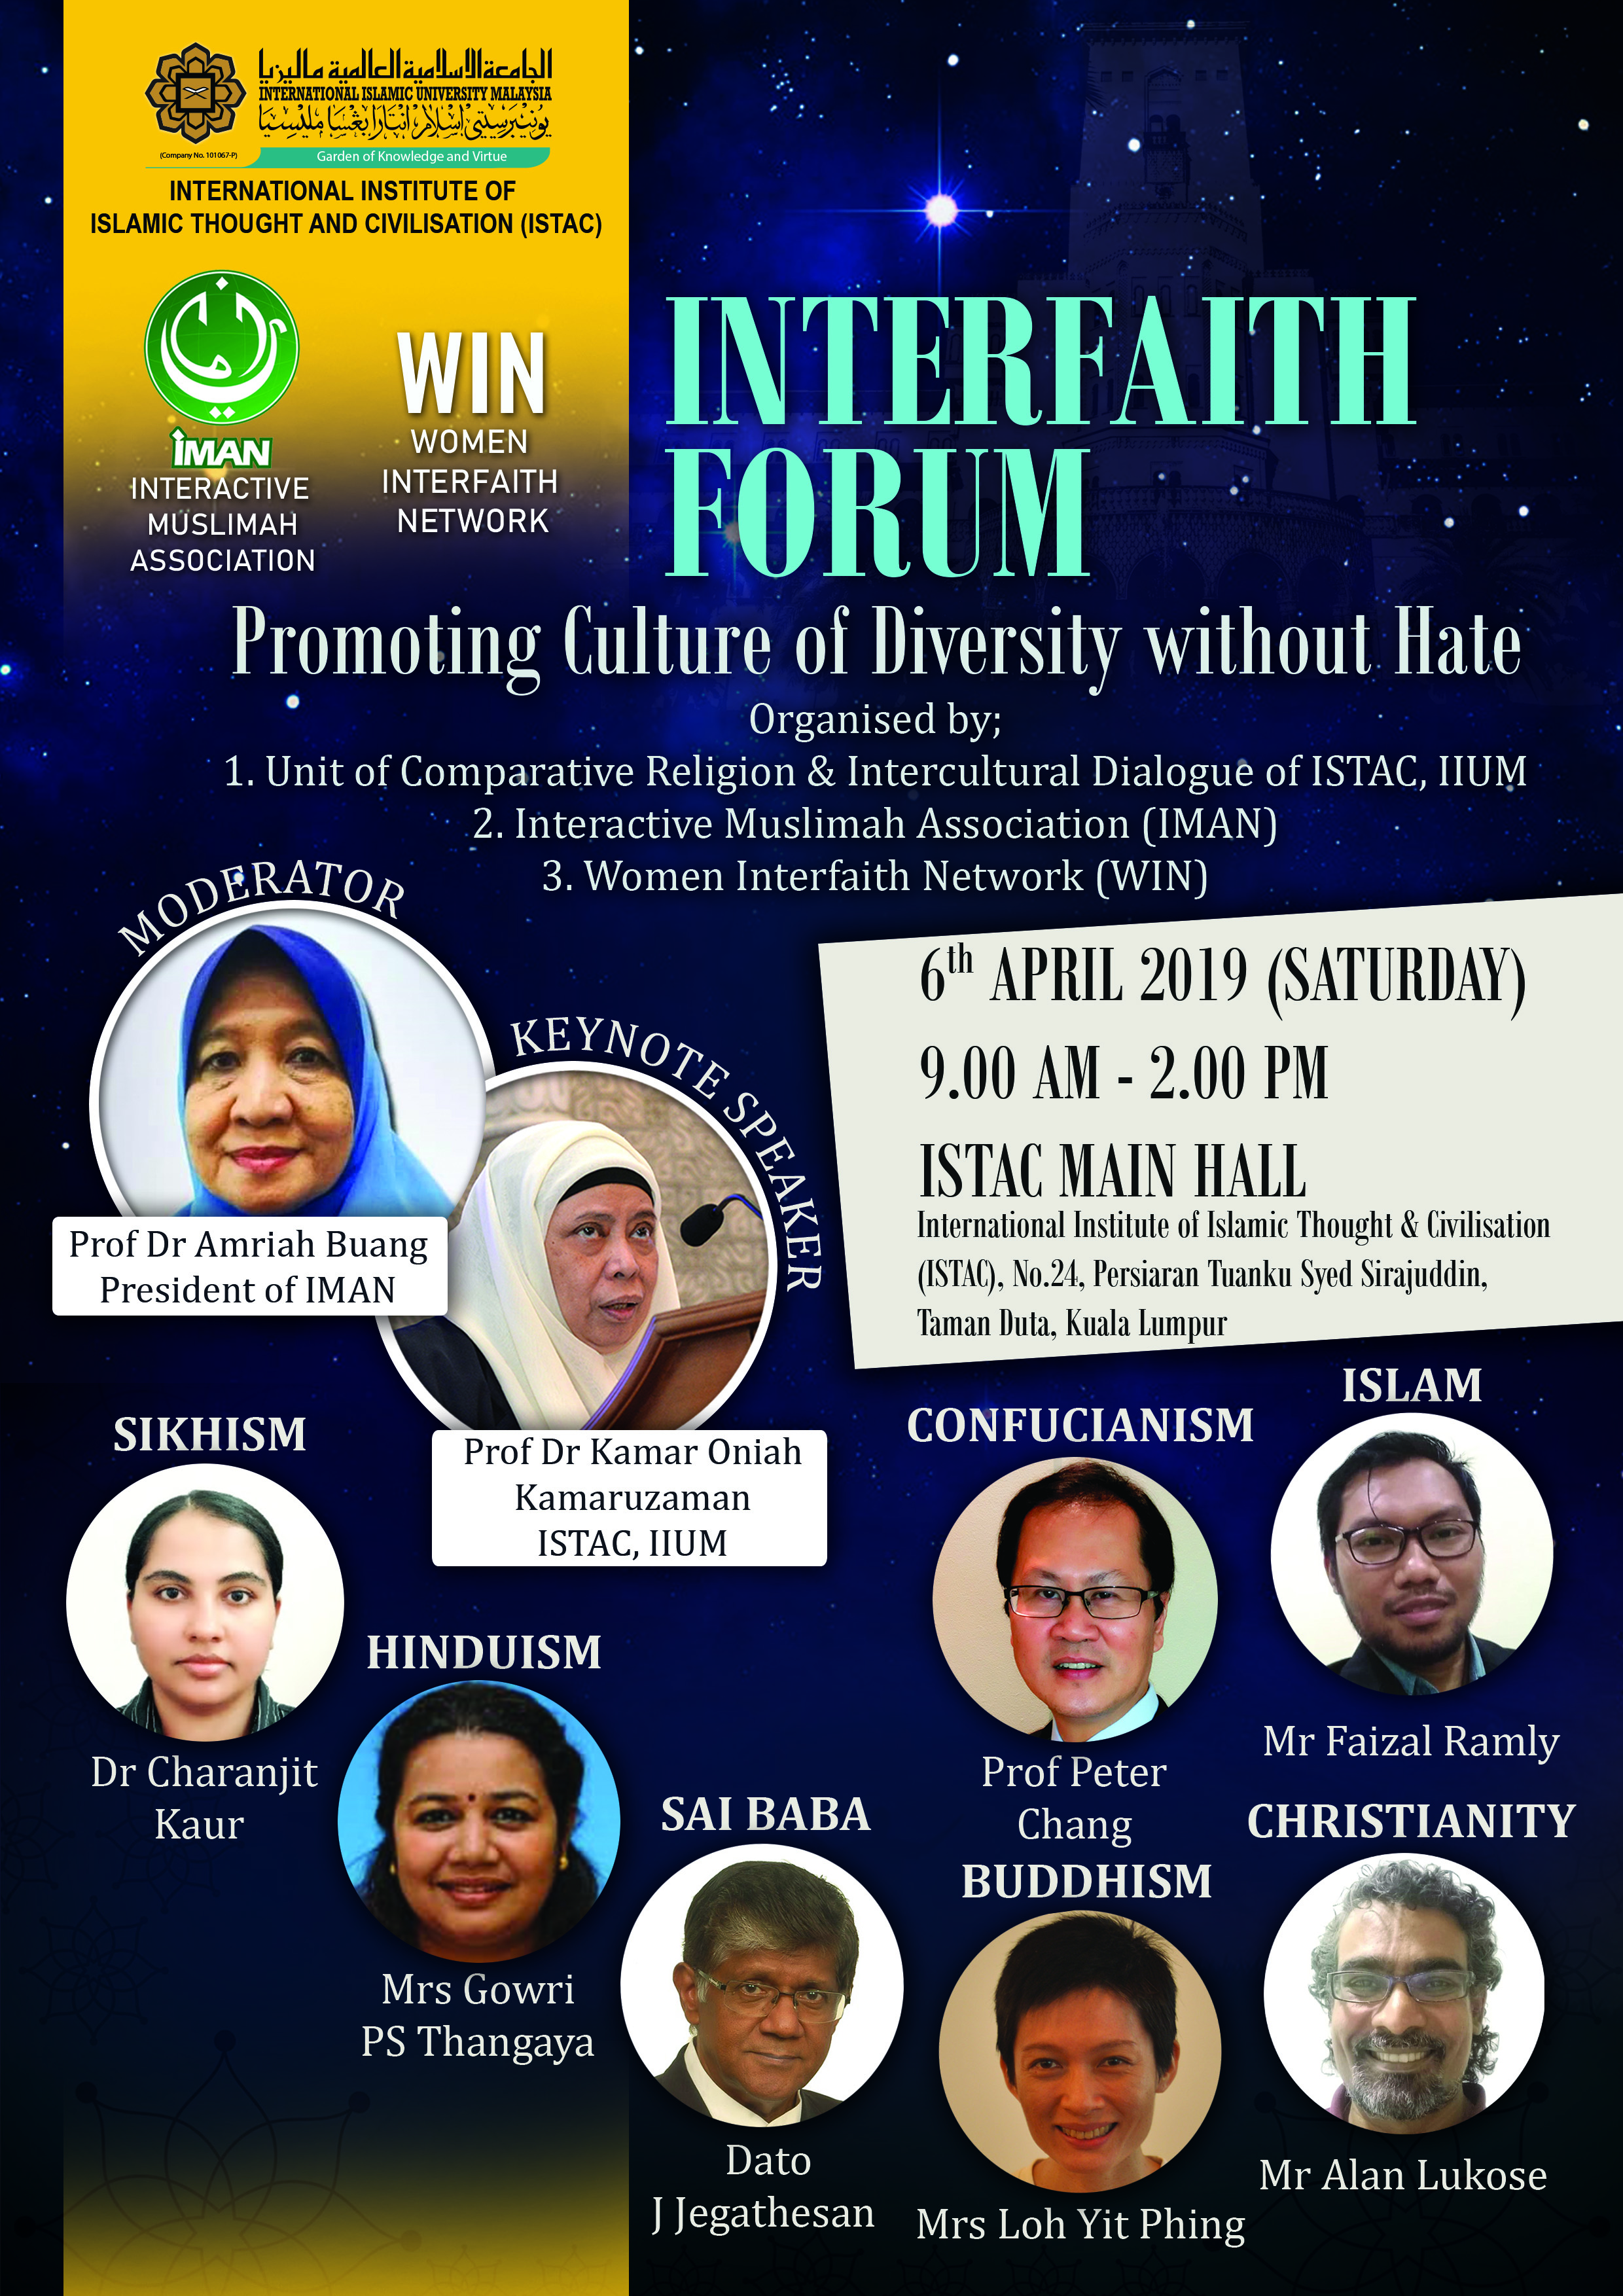 INTERFAITH FORUM : Promoting Culture of Diversity Without Hate